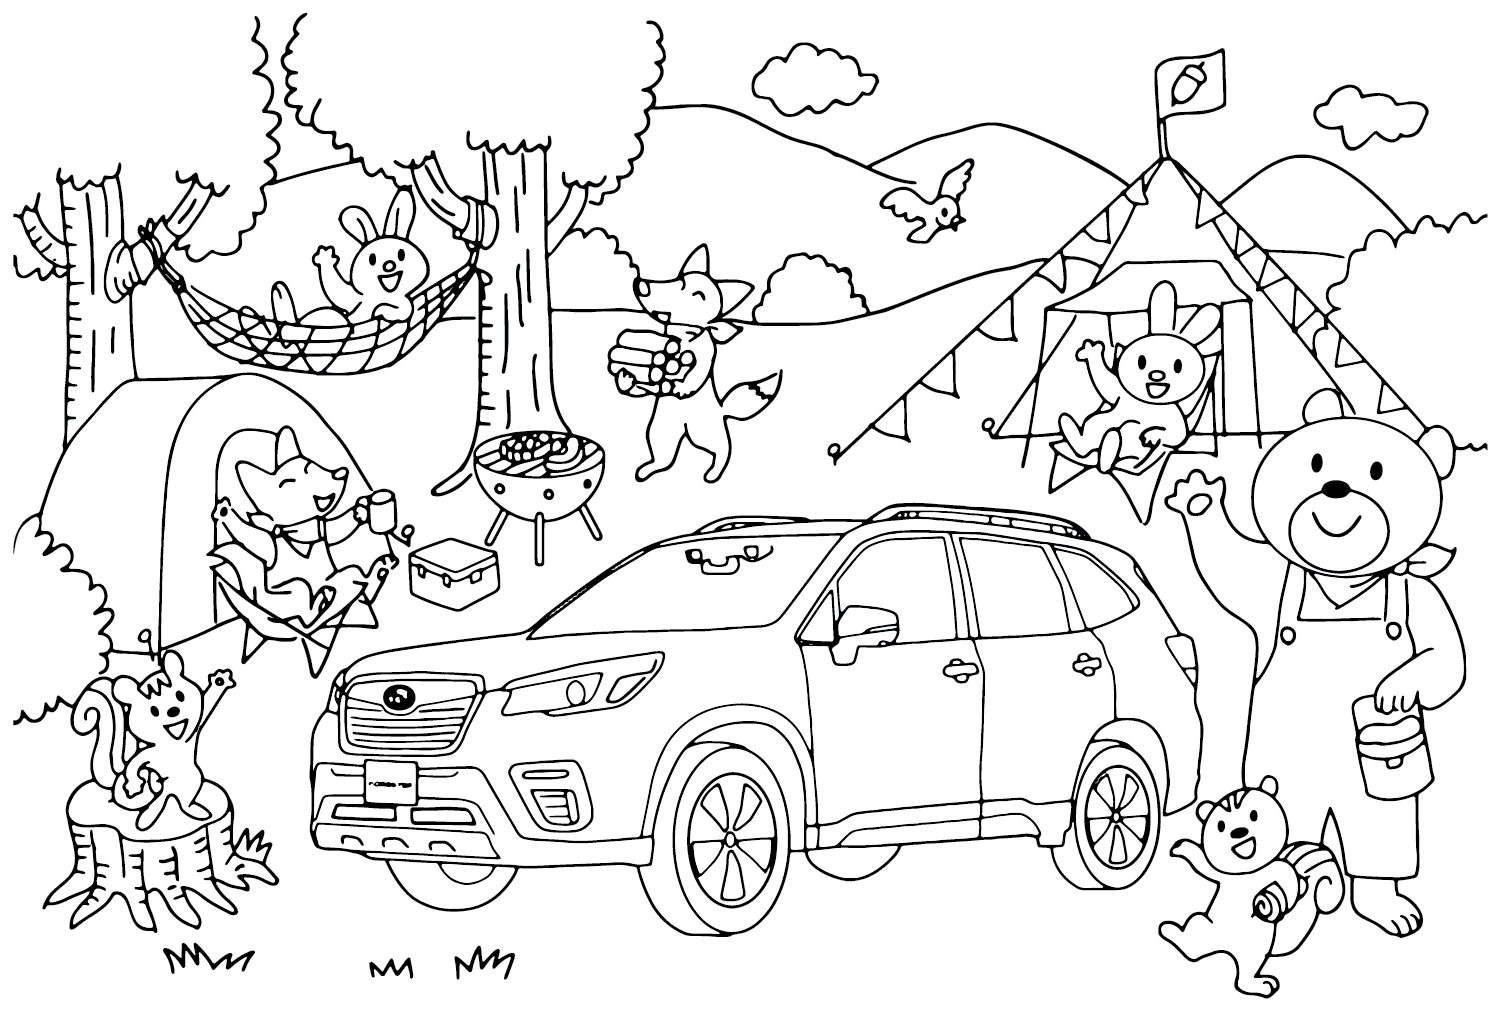 Subaru Coloring Pages to Download from Subaru